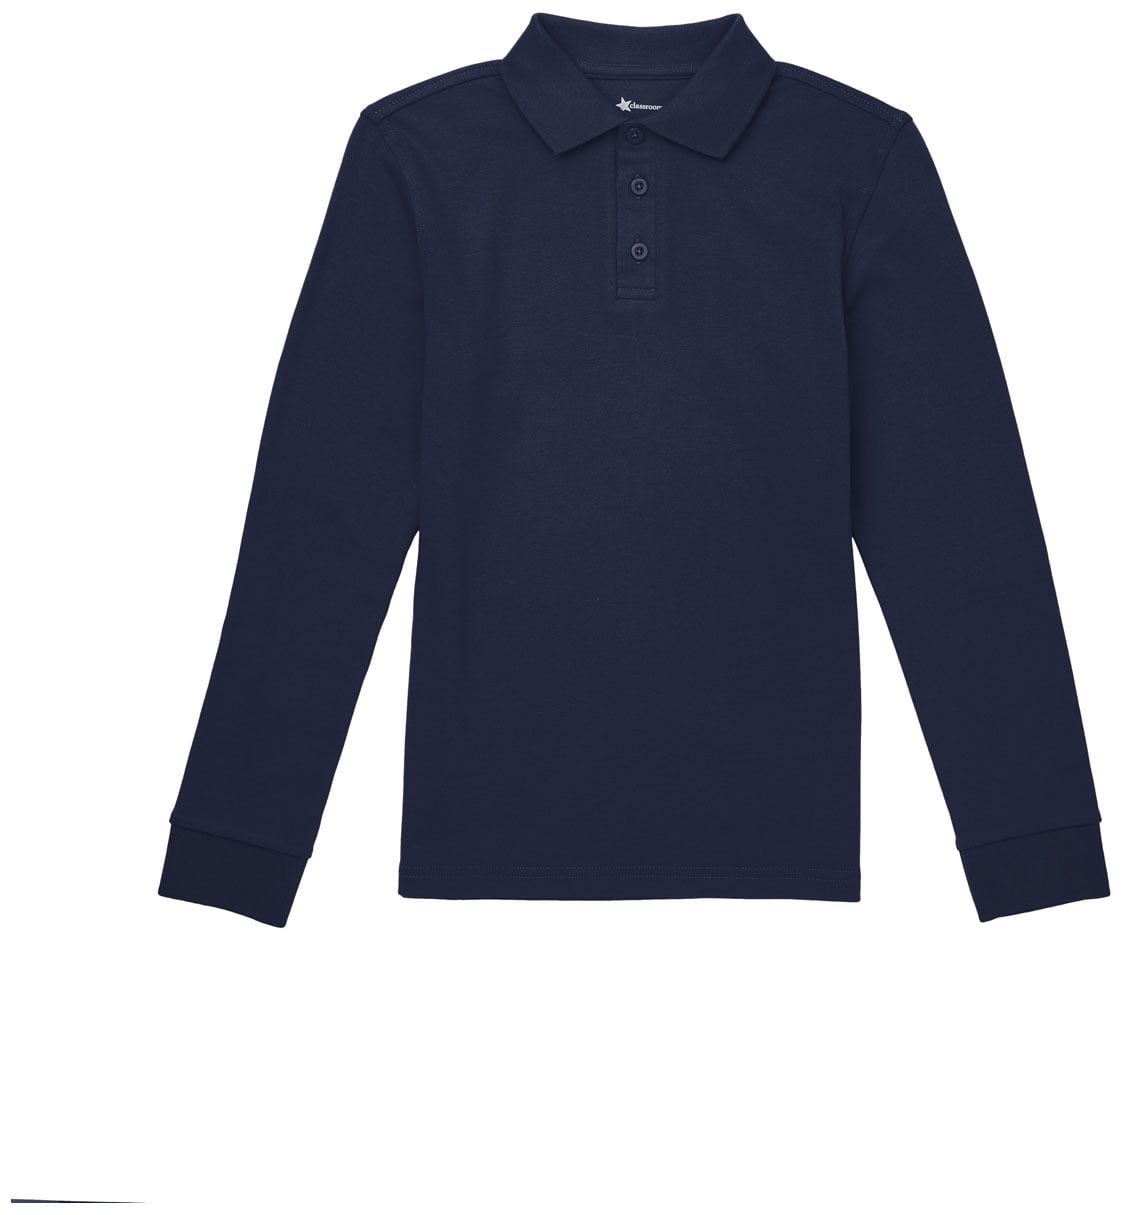 Classroom Uniforms Long Sleeve Interlock Polo Shirt-Youth Sizes Assorted Colors 